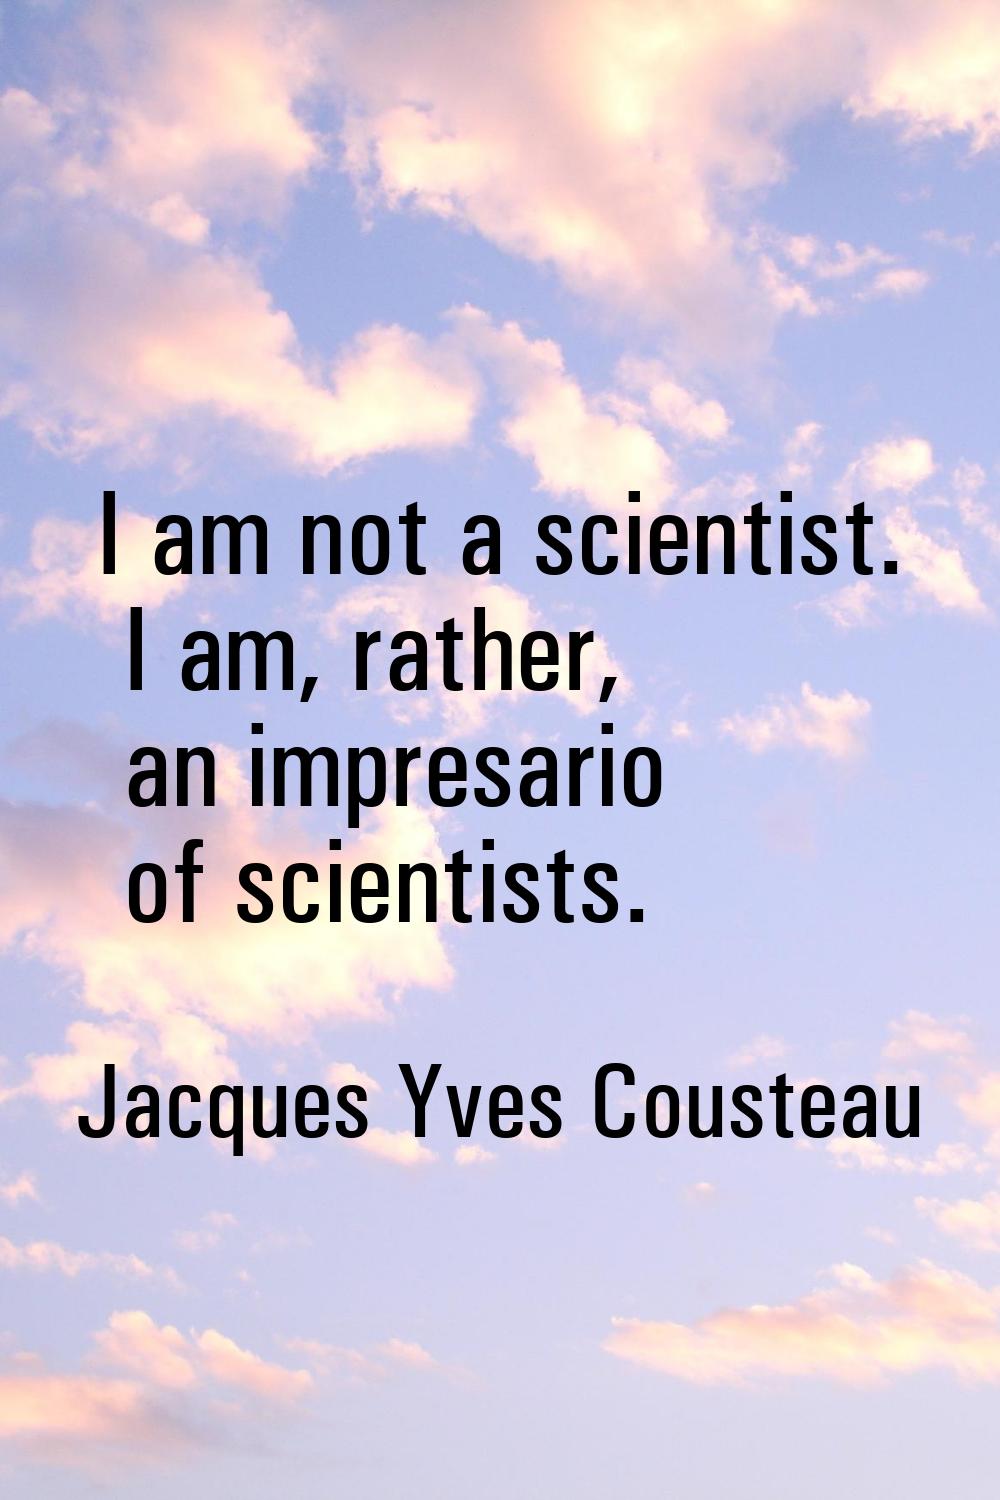 I am not a scientist. I am, rather, an impresario of scientists.